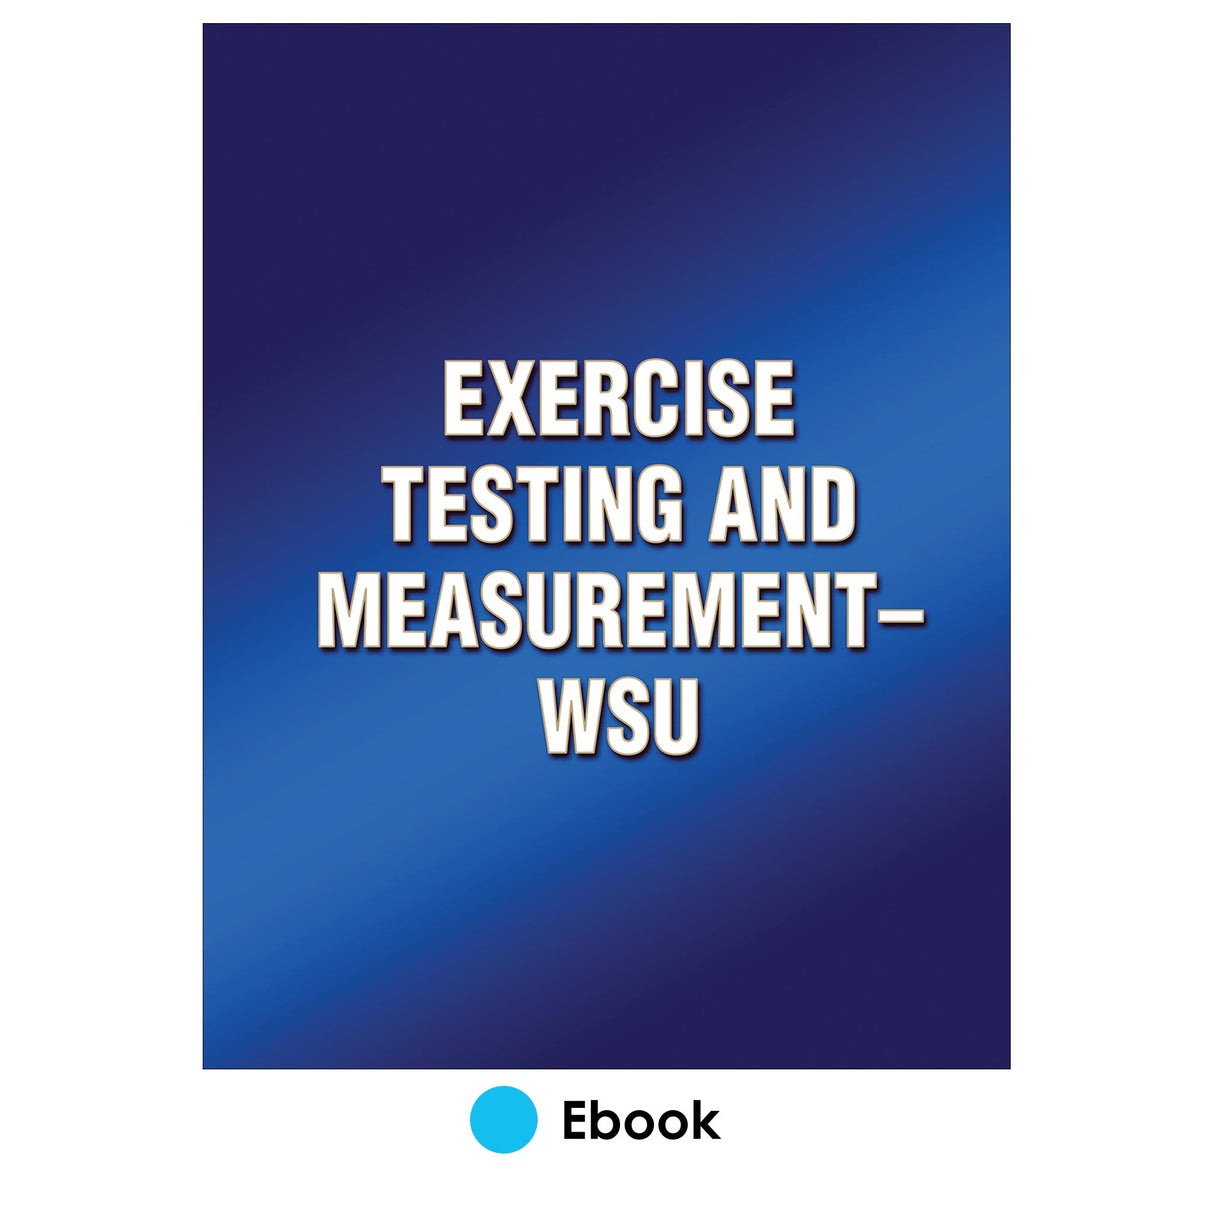 Exercise Testing and Measurement-WSU